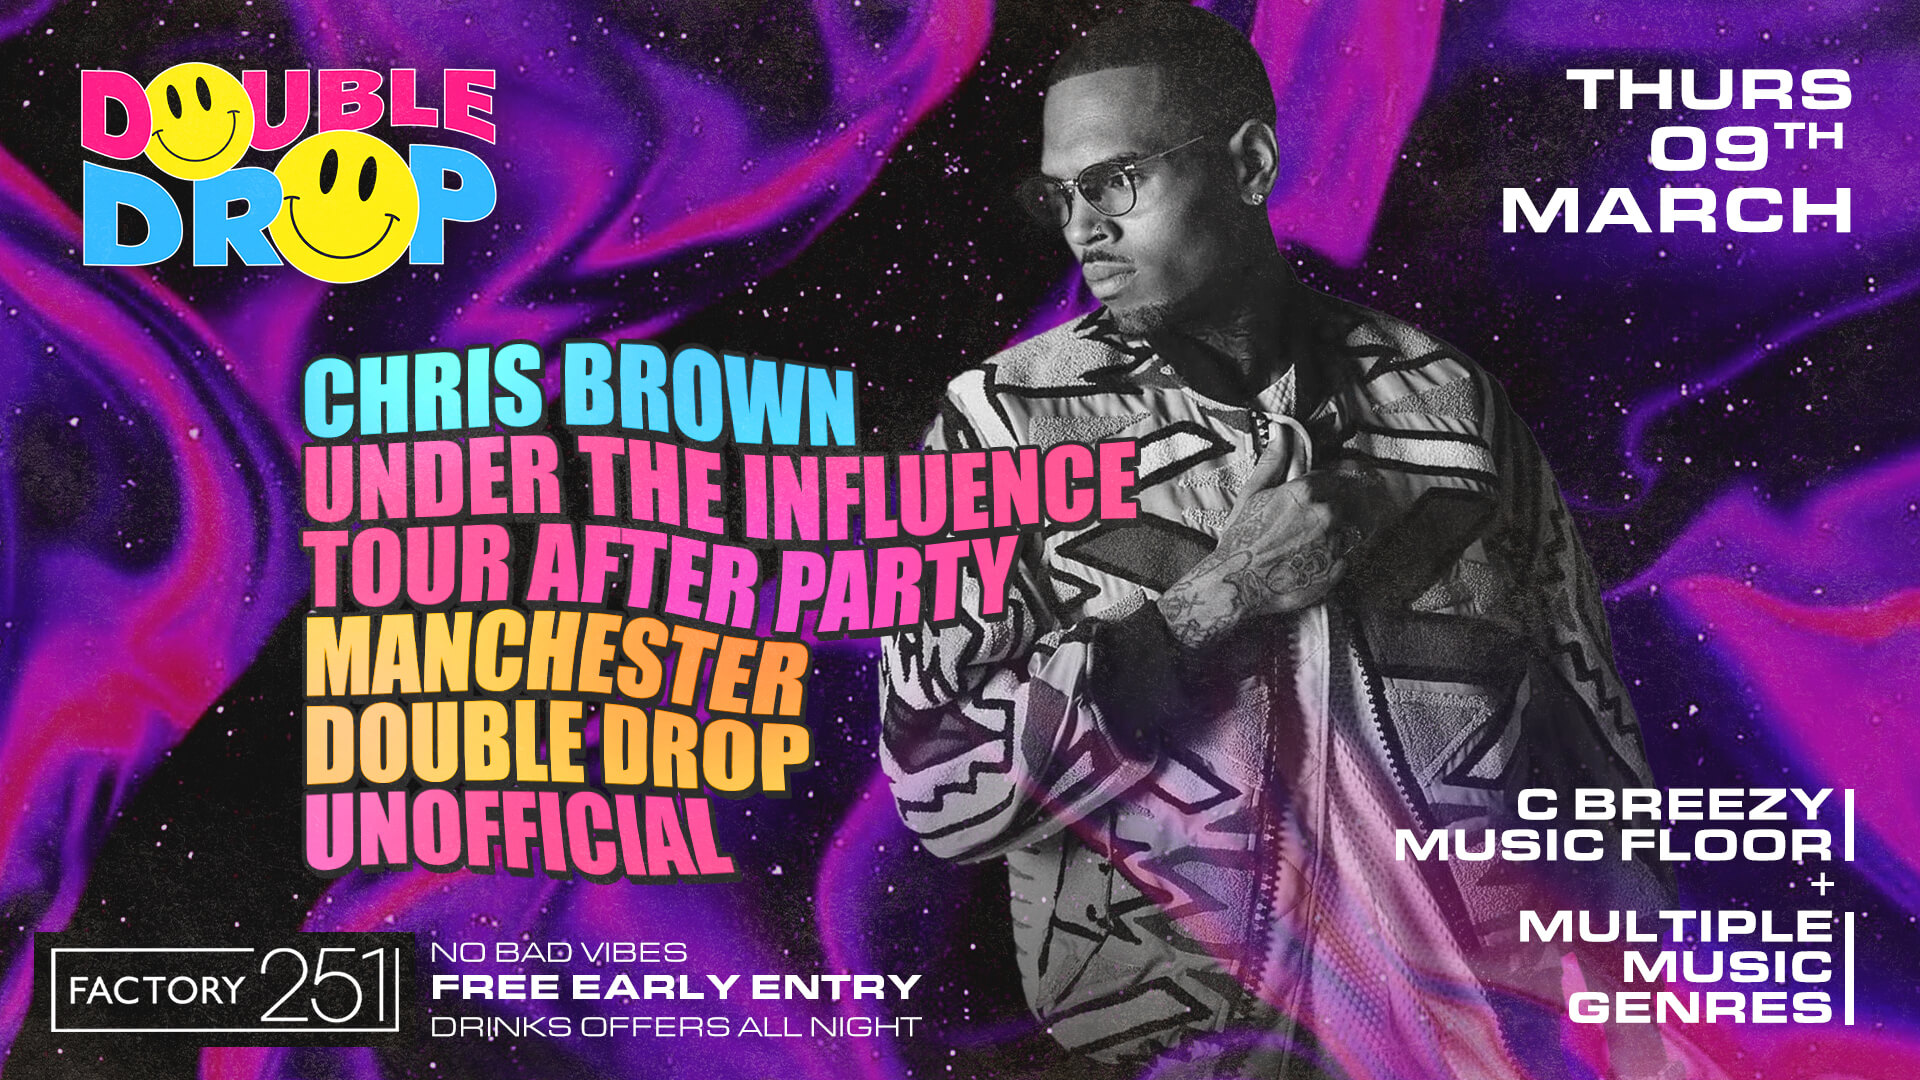 DOUBLE DROP ⚠️ 'UNDER THE INFLUENCE TOUR' CHRIS BROWN AFTER PARTY 🎤